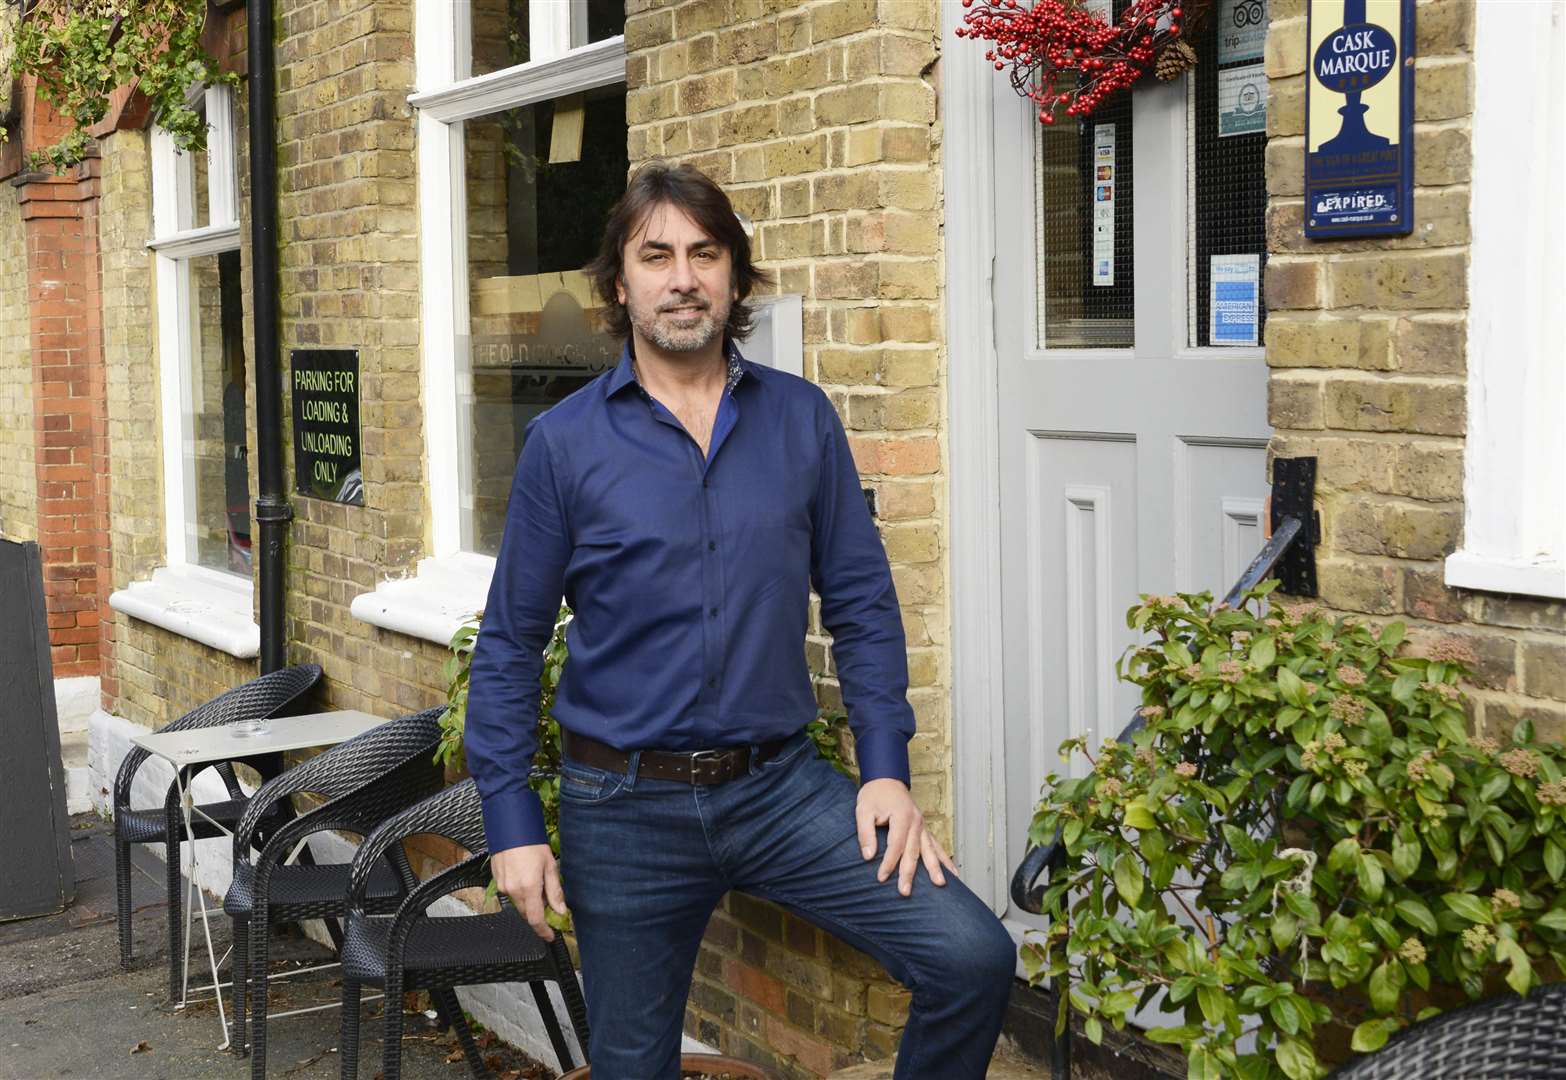 The Old Coach and Horses' new owner Eddie Sargeant is eyeing a place among the best gastropubs in Kent